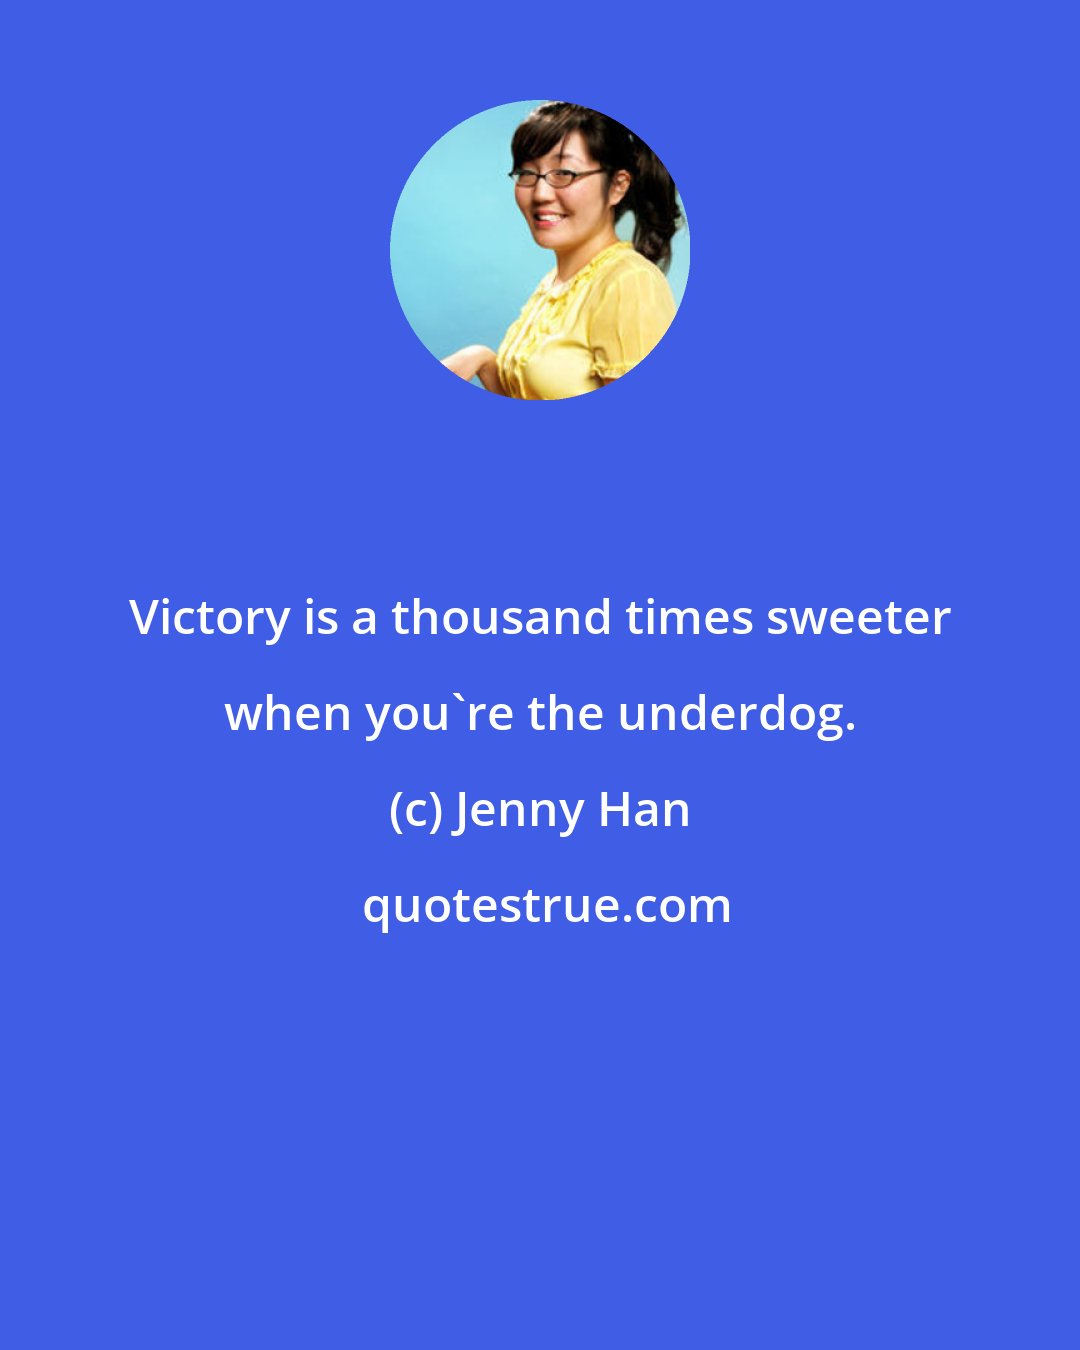 Jenny Han: Victory is a thousand times sweeter when you're the underdog.